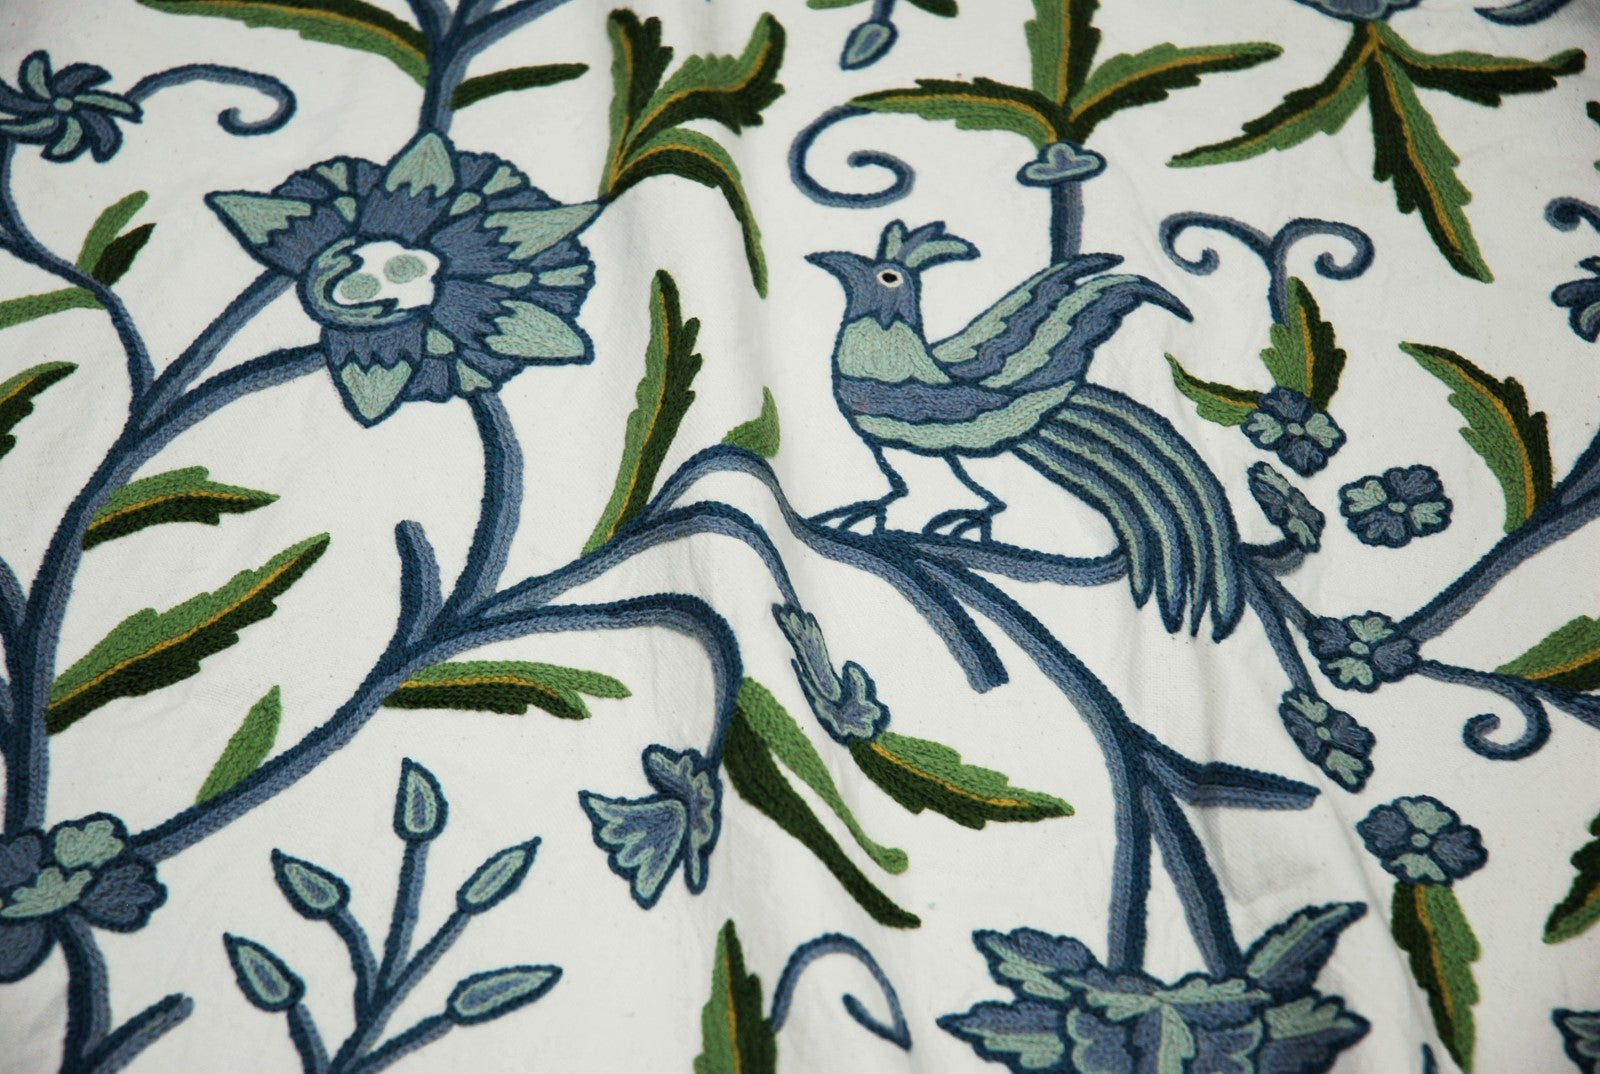 Cotton Crewel Embroidered Fabric "Tree of Life Birds", Blue and Green #BRD112